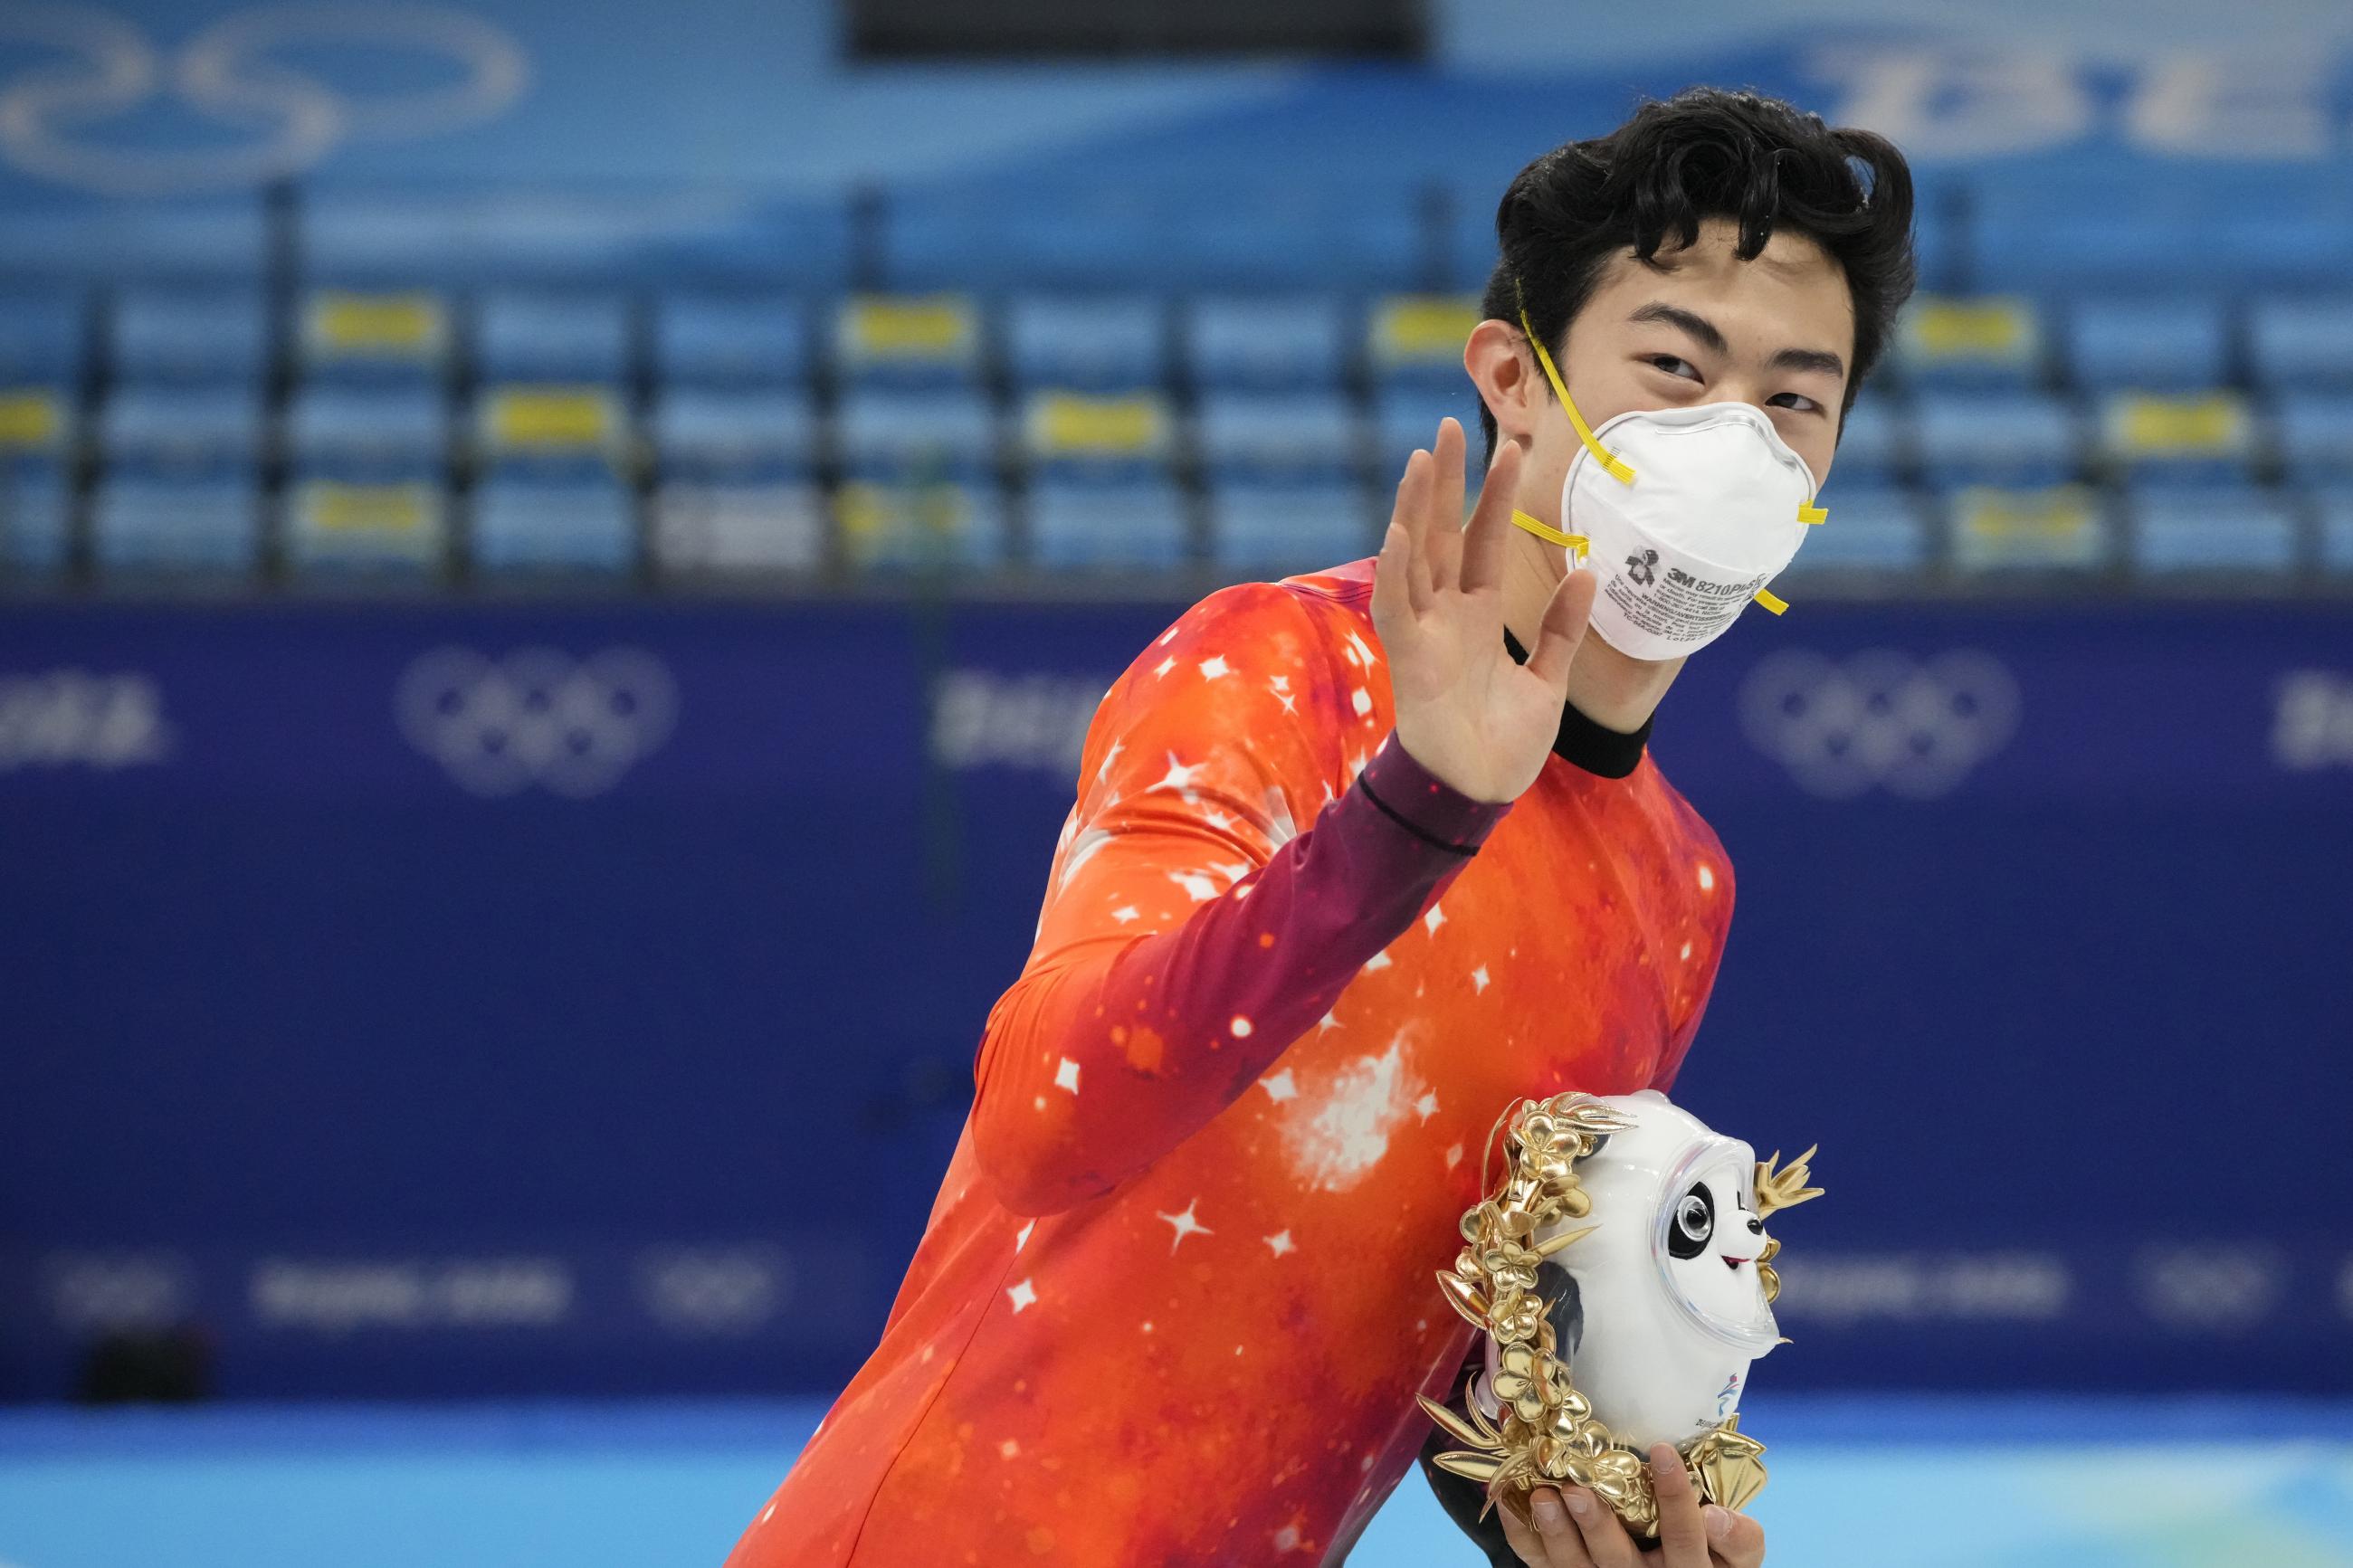 Gold medalist Nathan Chen (USA) after the mens singles free program at the Beijing 2022 Olympic Winter Games, Capital Indoor Stadium, February 10, 2022.